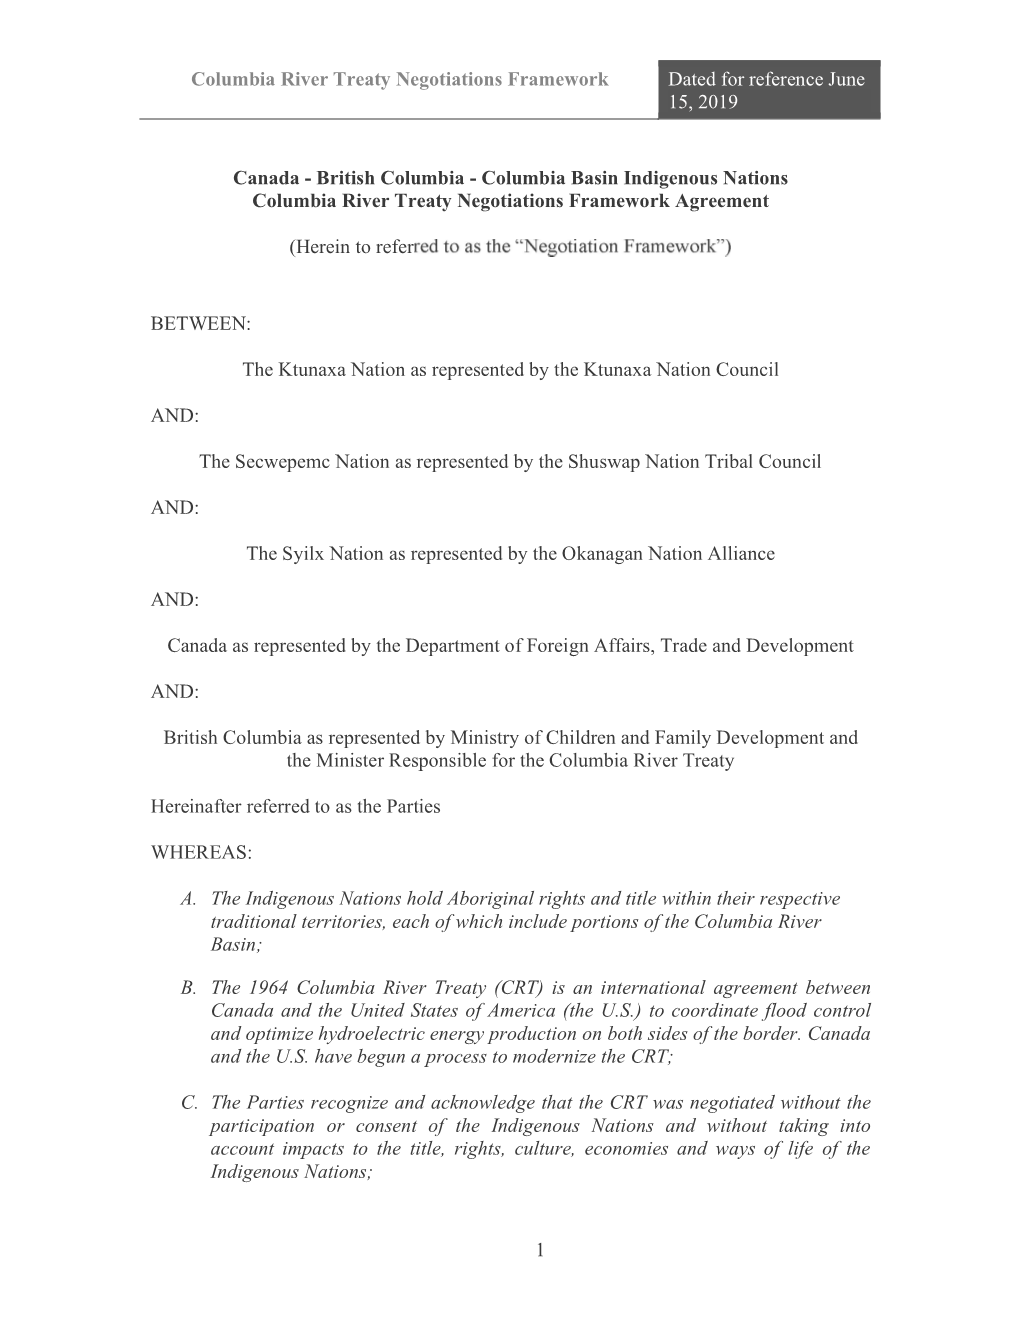 Columbia River Treaty Negotiations Framework Dated for Reference June 15, 2019